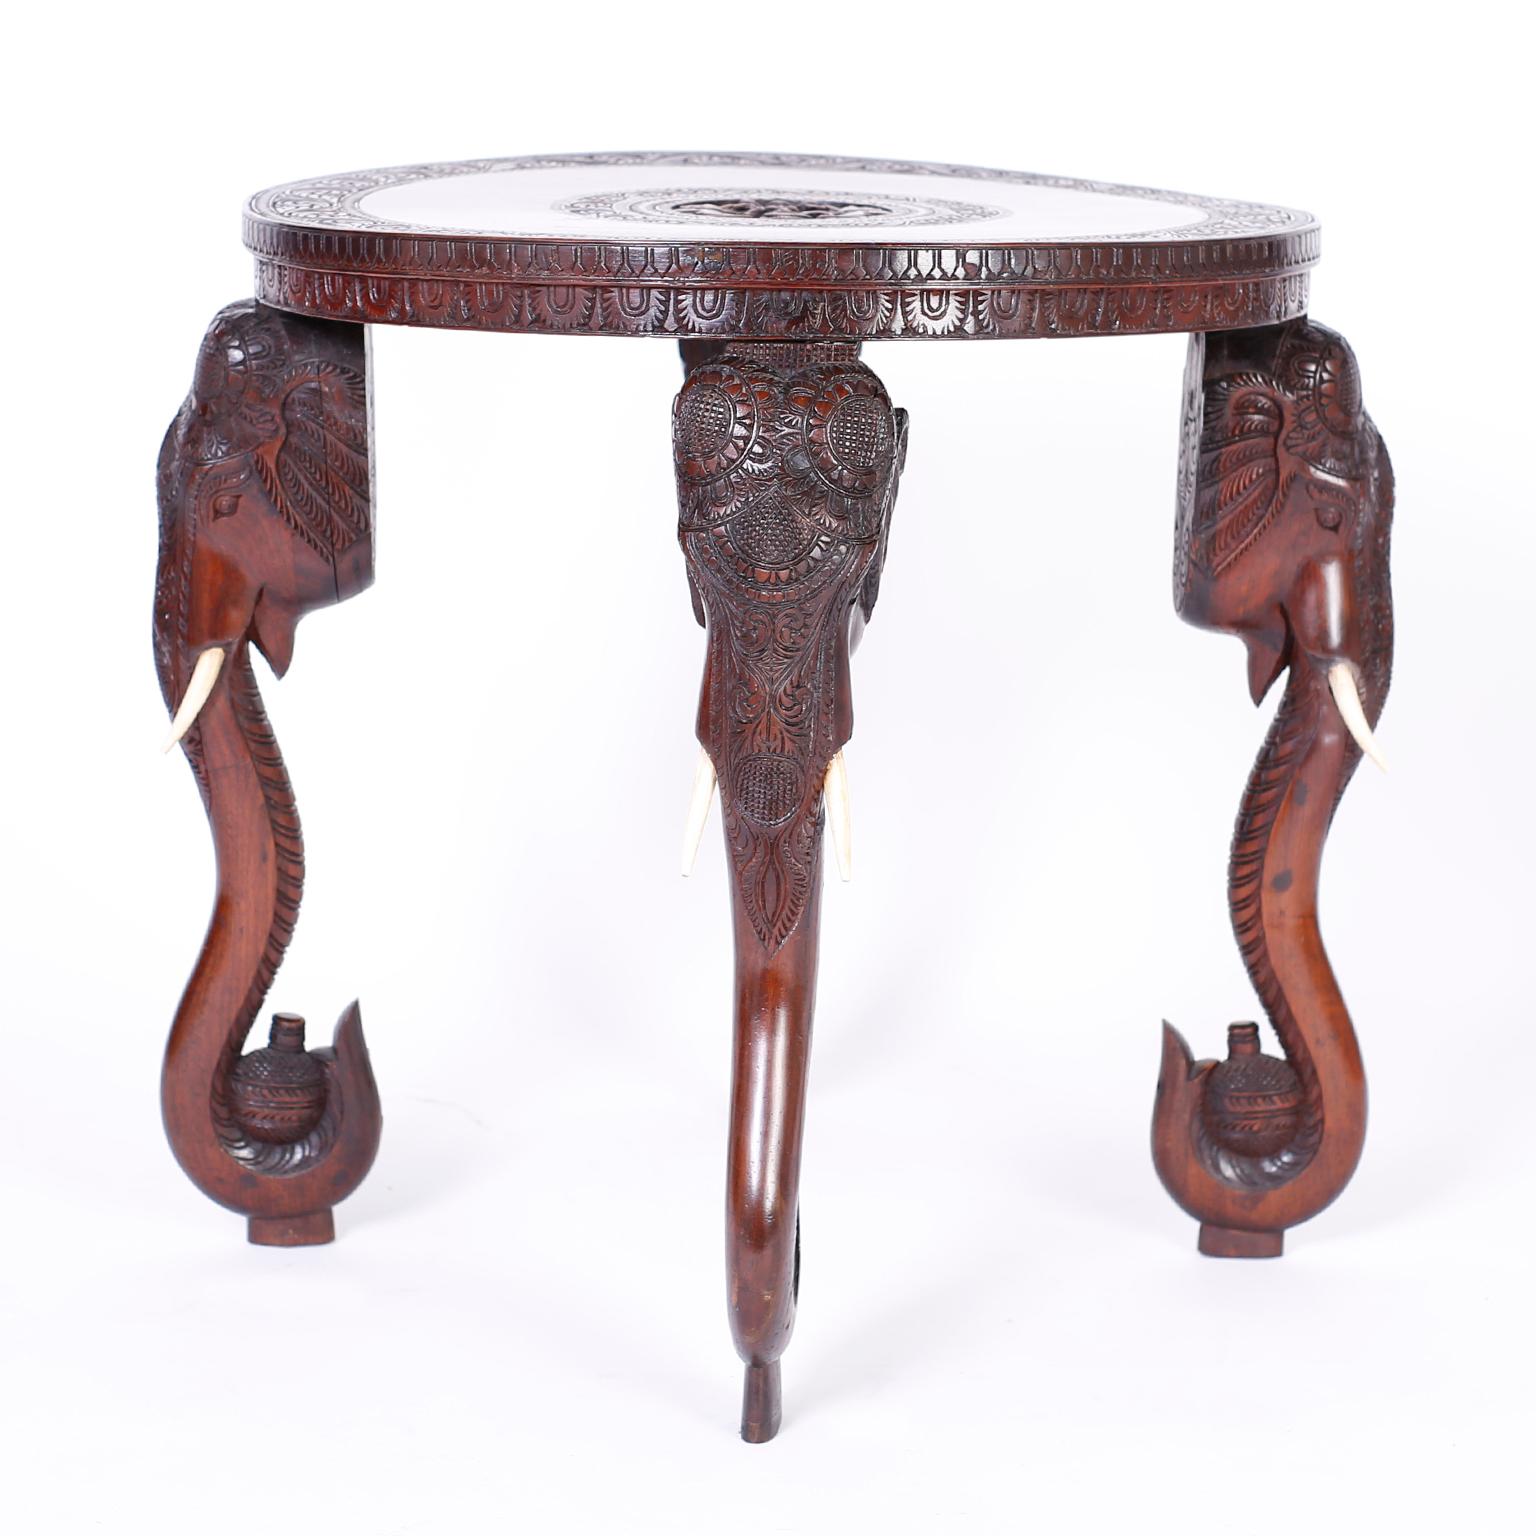 Anglo Indian table or stand crafted in mahogany with a round top having a carved center medallion depicting a deity with elephants surrounded by floral carvings. The four elephant head legs have bone tusks and trunks carrying flasks.